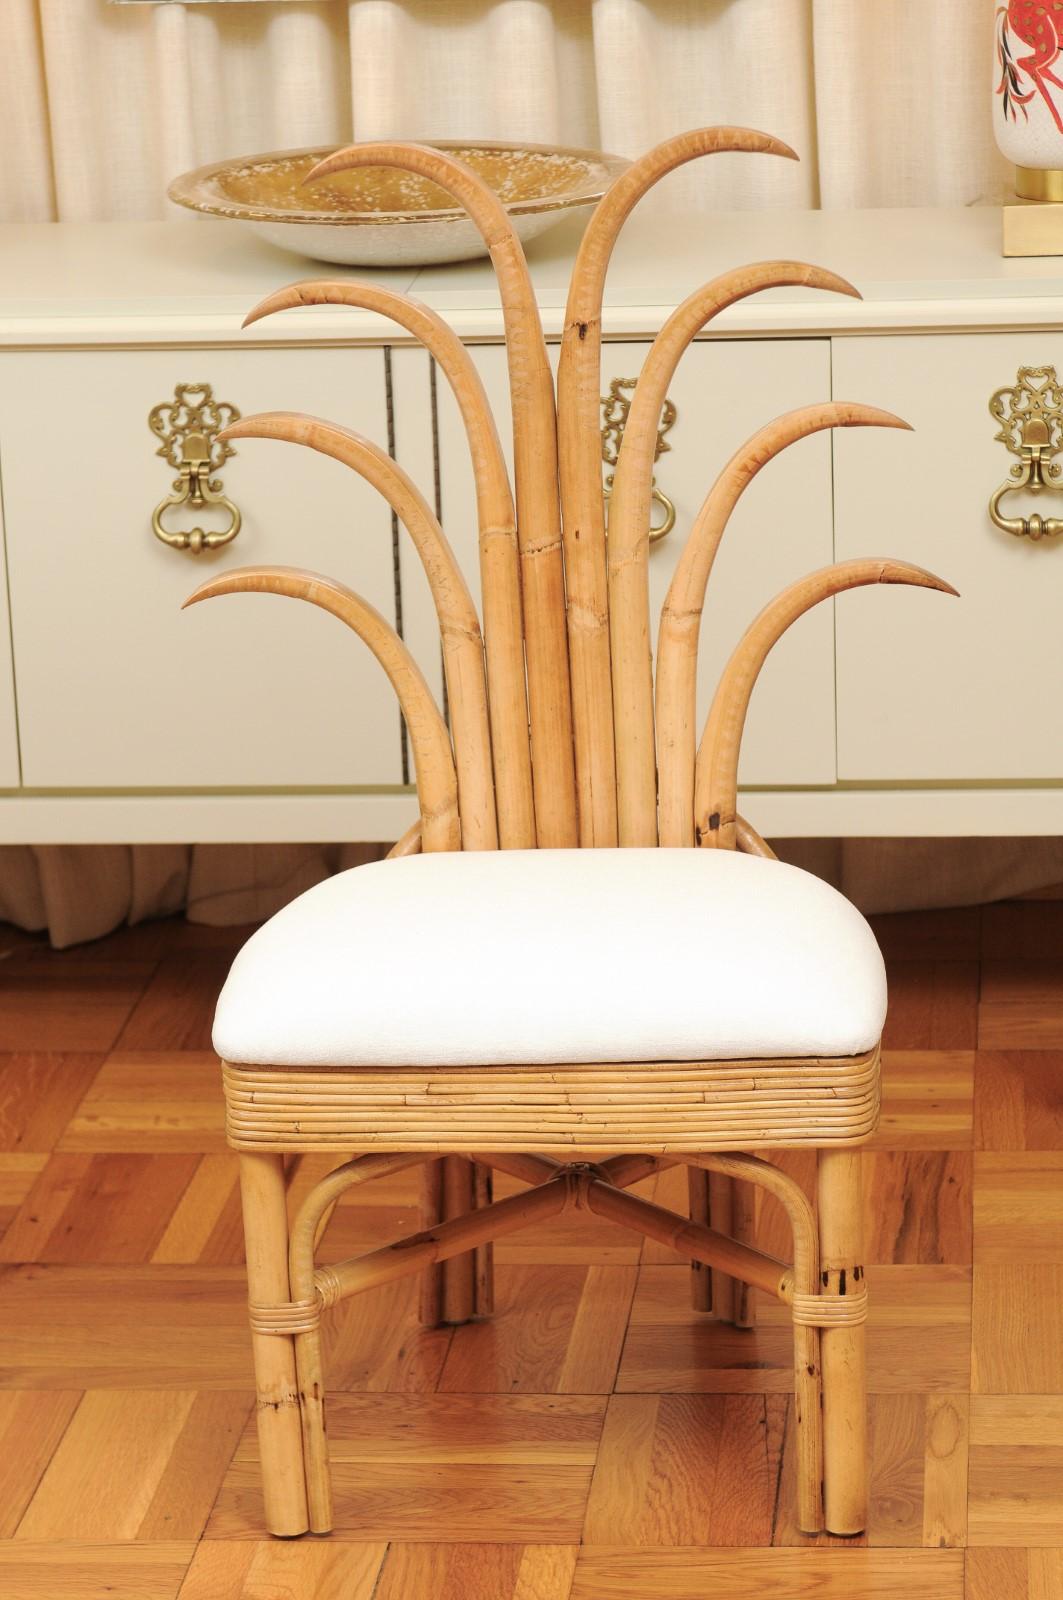 Exquisite Set of 10 Rattan and Cane Palm Frond Dining Chairs, circa 1950 In Excellent Condition For Sale In Atlanta, GA